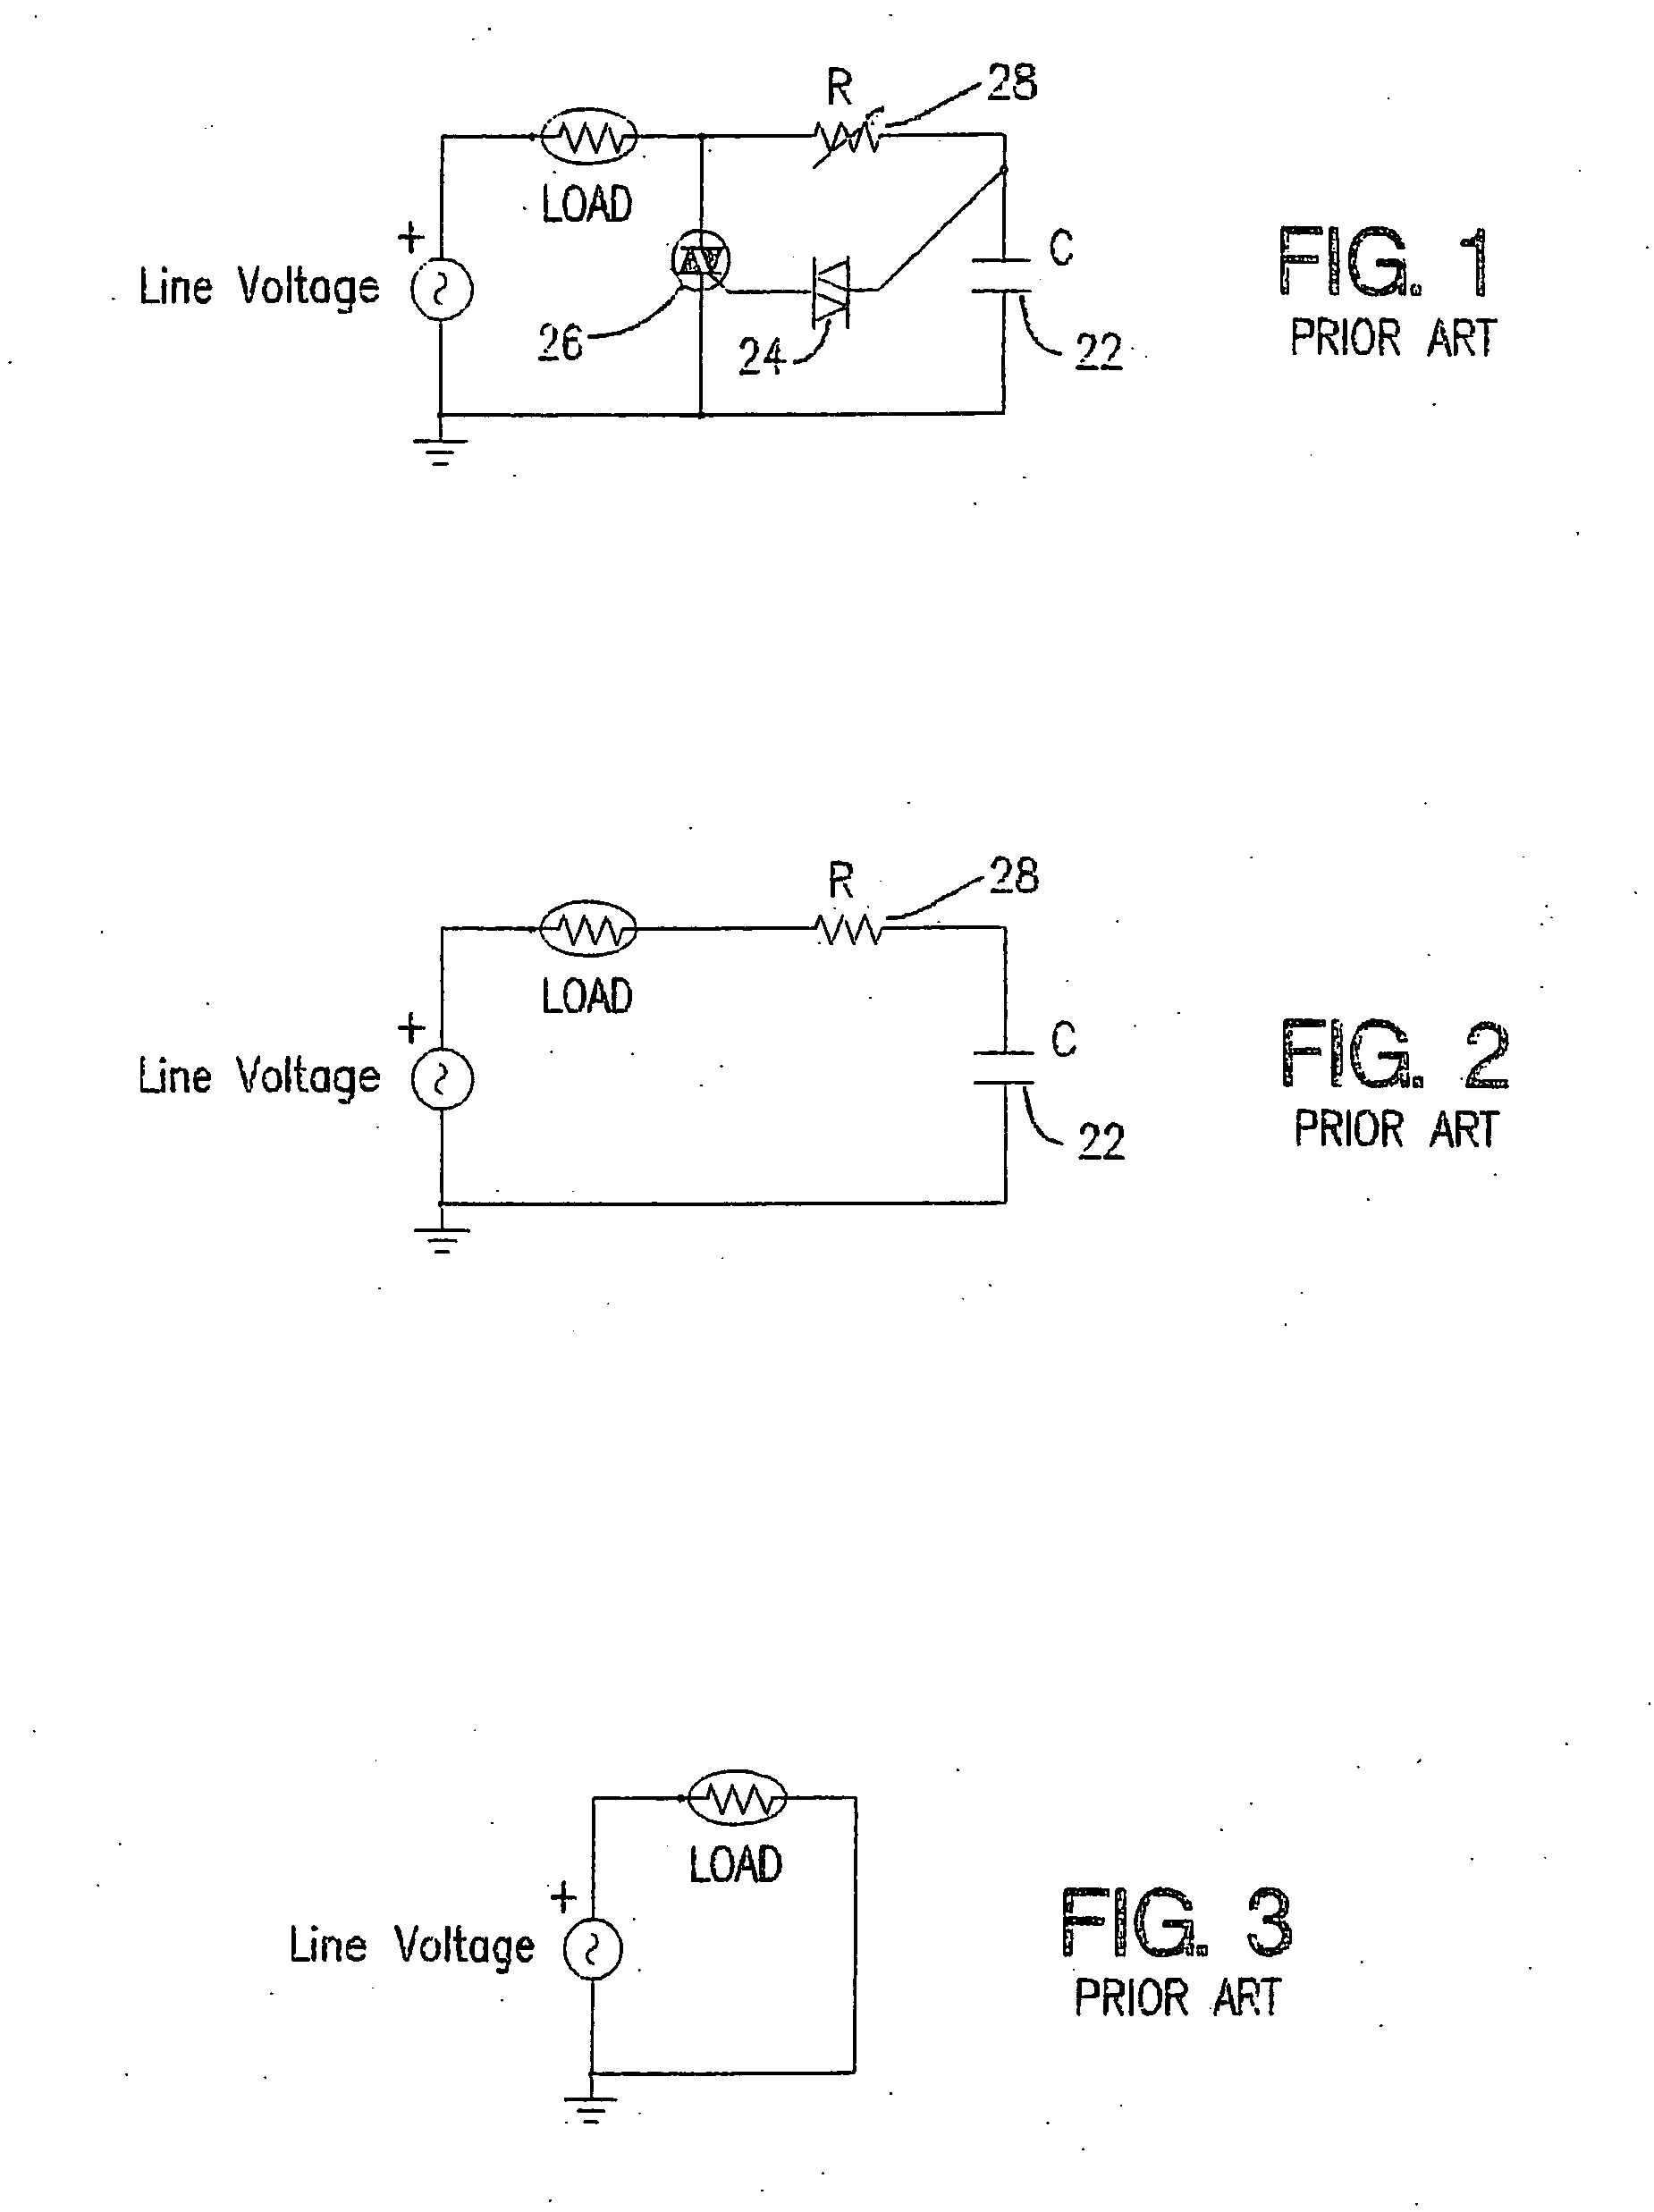 Method of soft-starting a switching power supply including pulse width modulation circuit